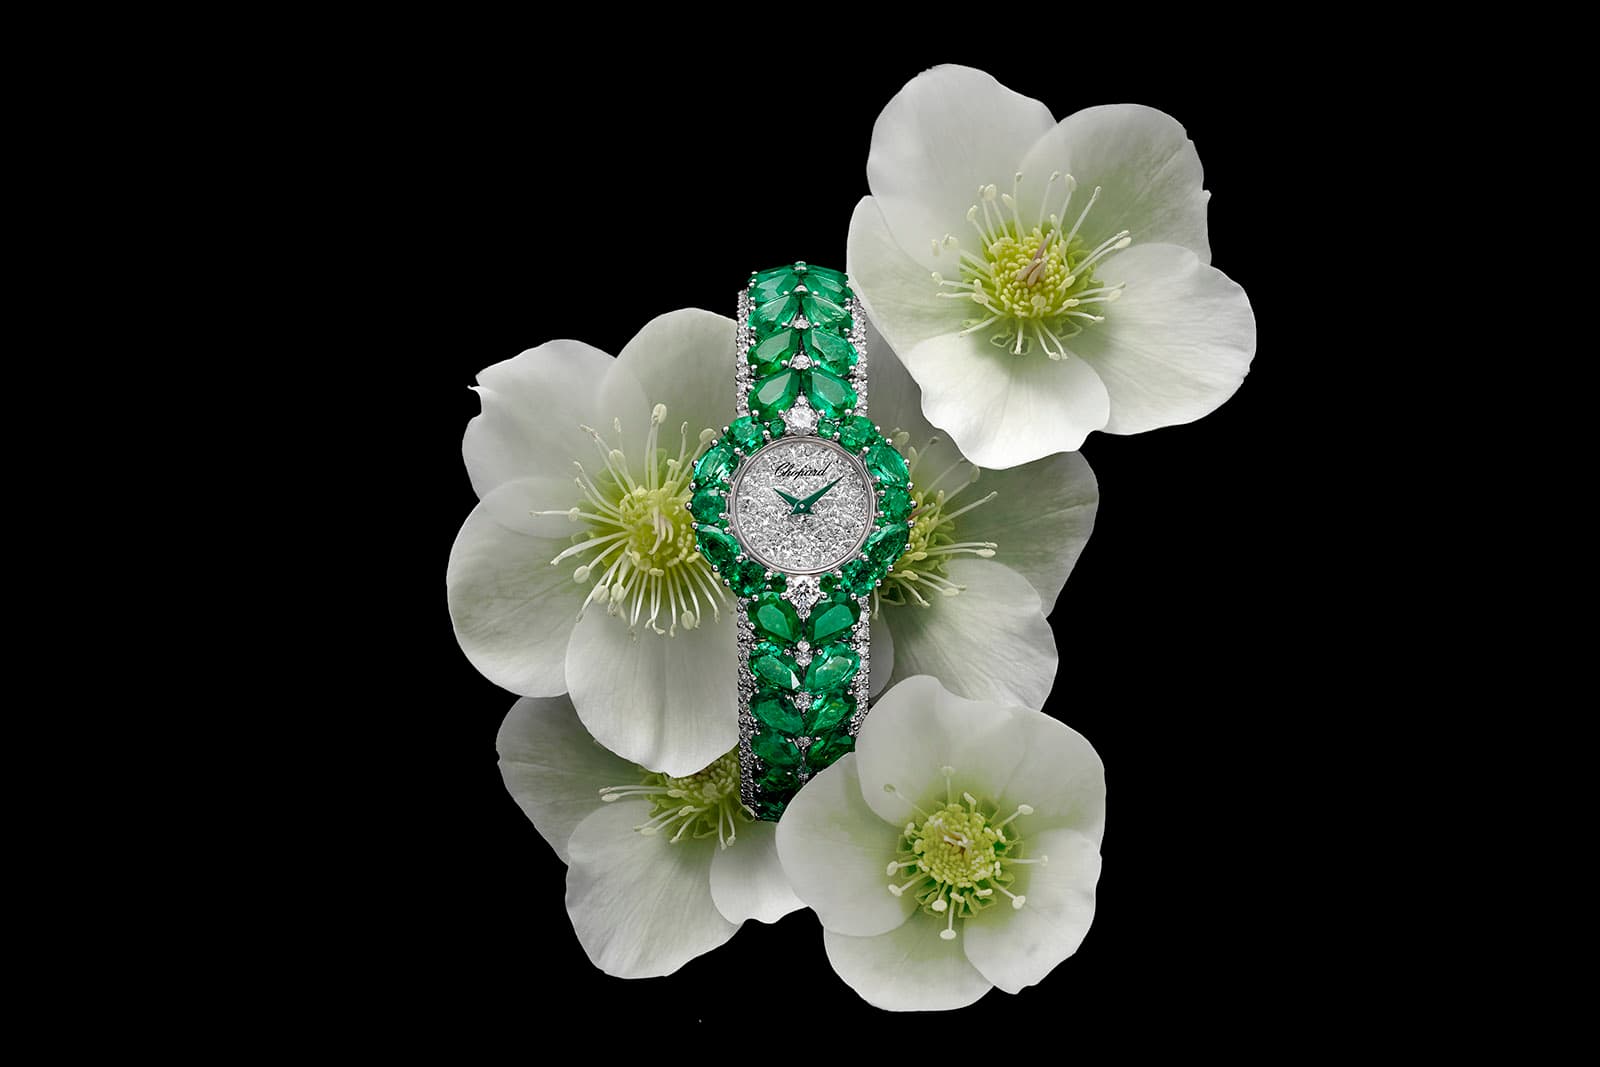 The Chopard Esperanza high jewellery watch with 6.38 carats of pear- and round brilliant-cut diamonds and 41.89 carats of Zambian emeralds